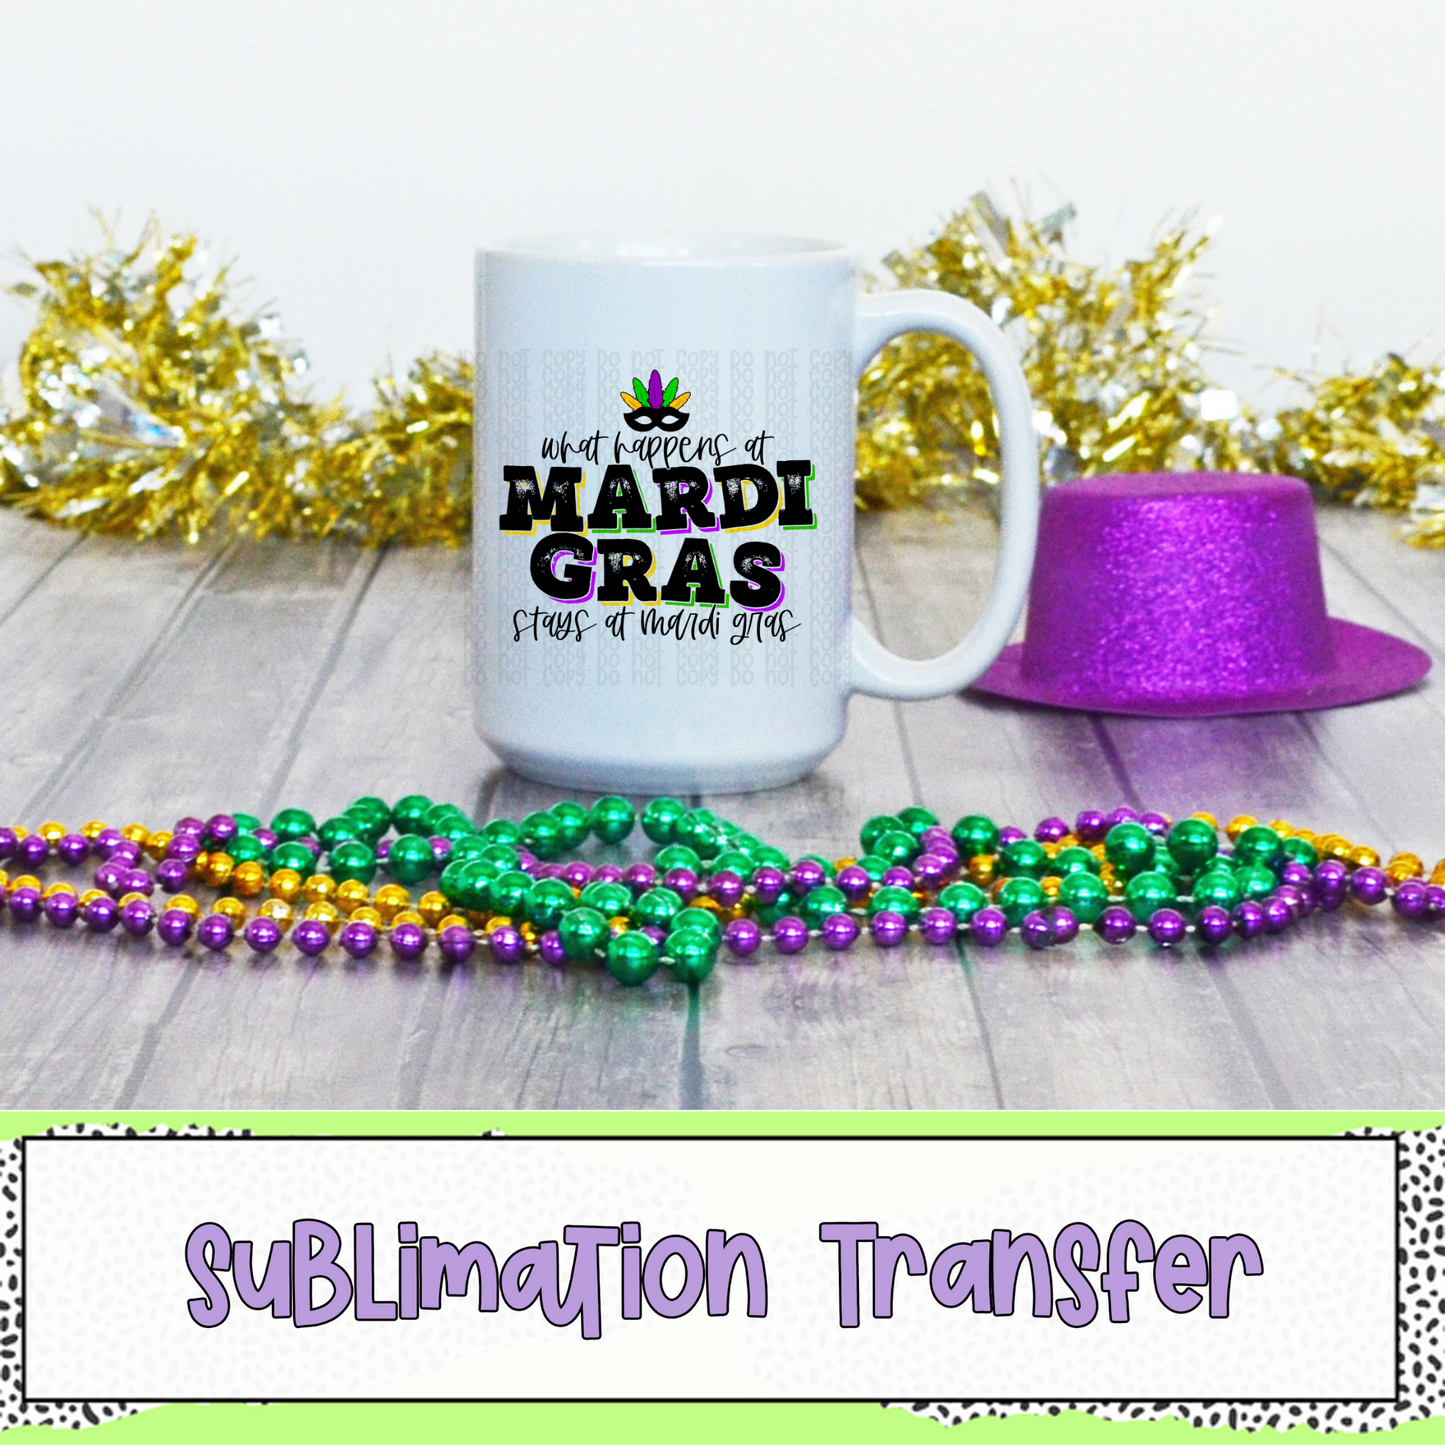 What Happens at Mardi Gras - SUBLIMATION TRANSFER